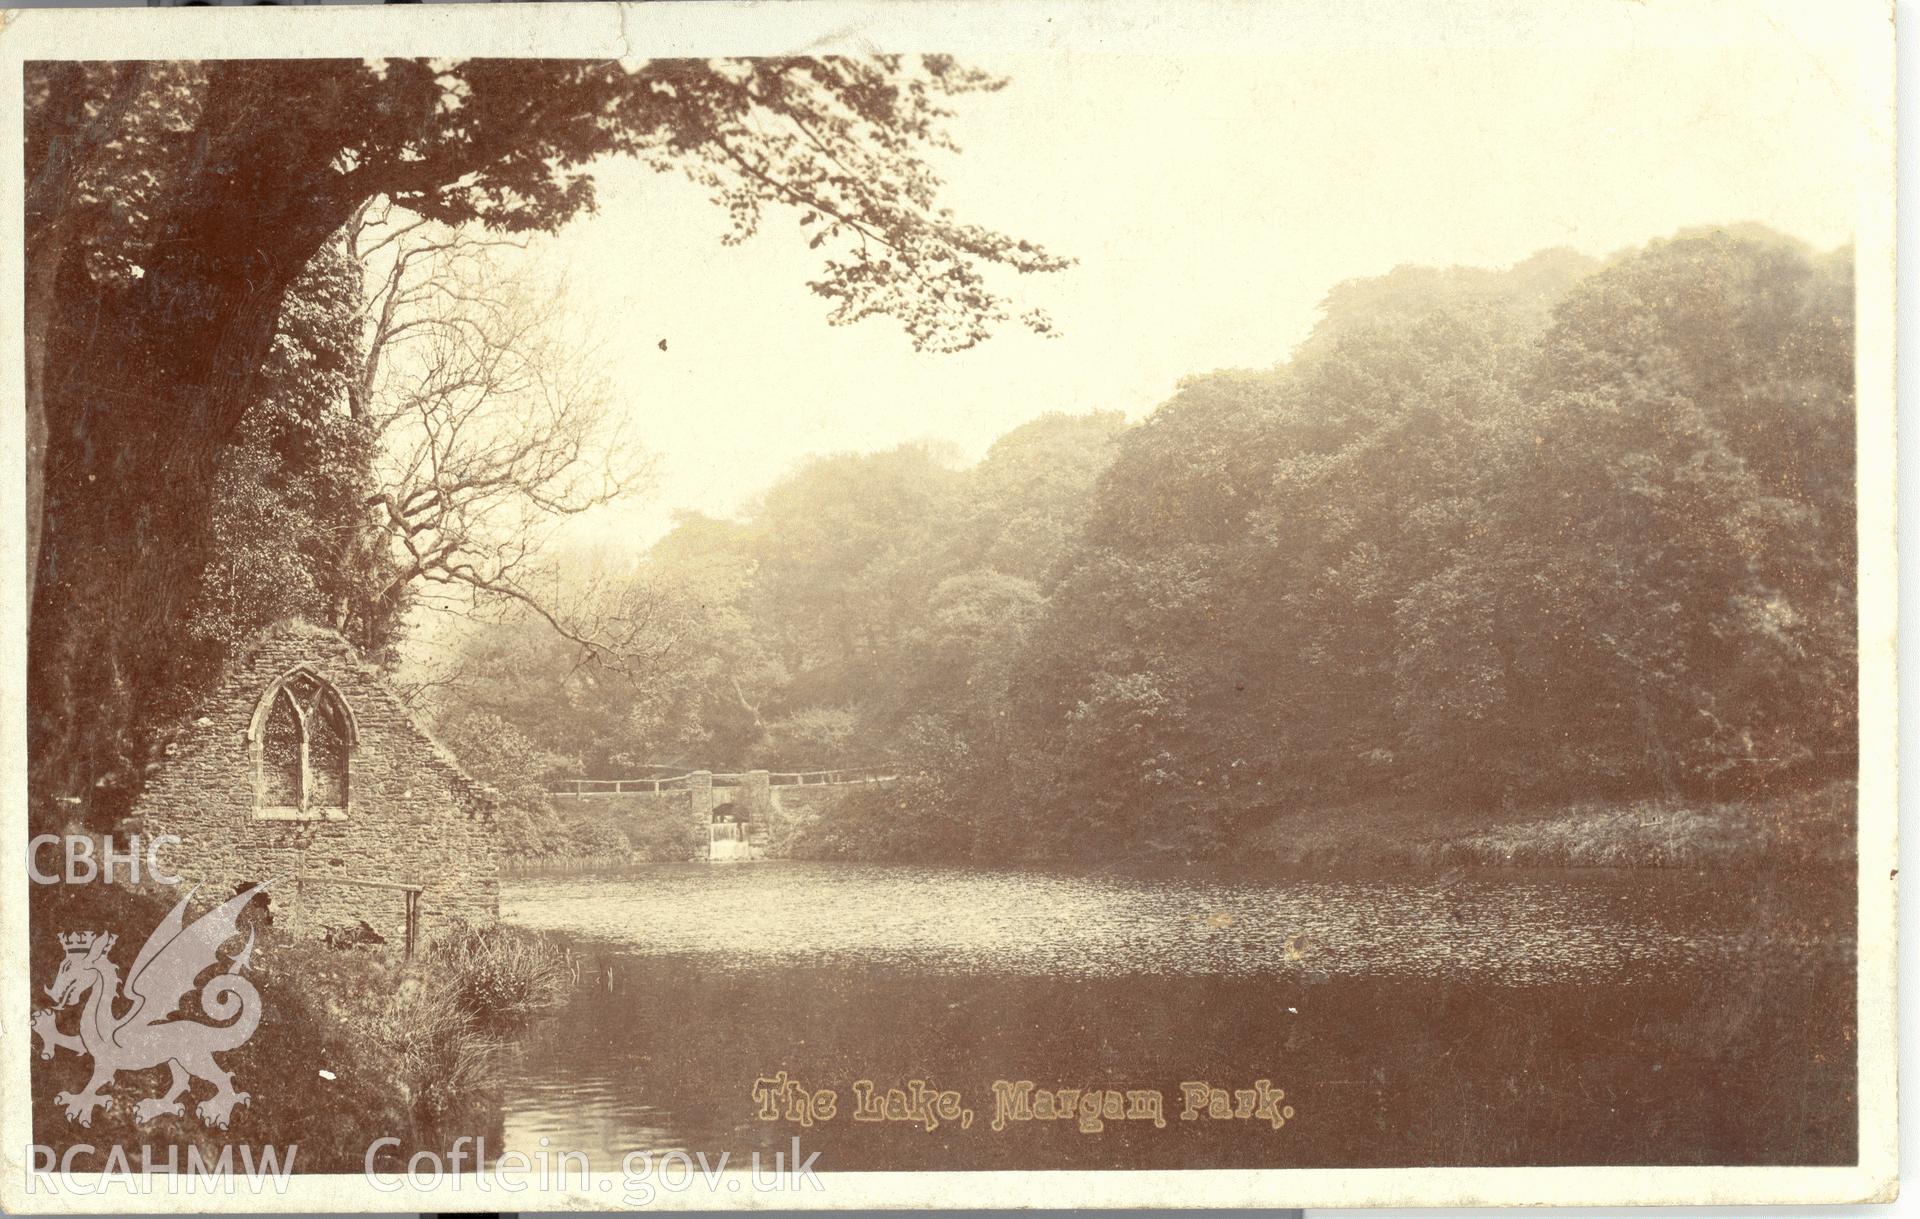 Digitised postcard image of the lake, Margam park gardens, F.W. Holloway, Windsor Road, Neath. Produced by Parks and Gardens Data Services, from an original item in the Peter Davis Collection at Parks and Gardens UK. We hold only web-resolution images of this collection, suitable for viewing on screen and for research purposes only. We do not hold the original images, or publication quality scans.